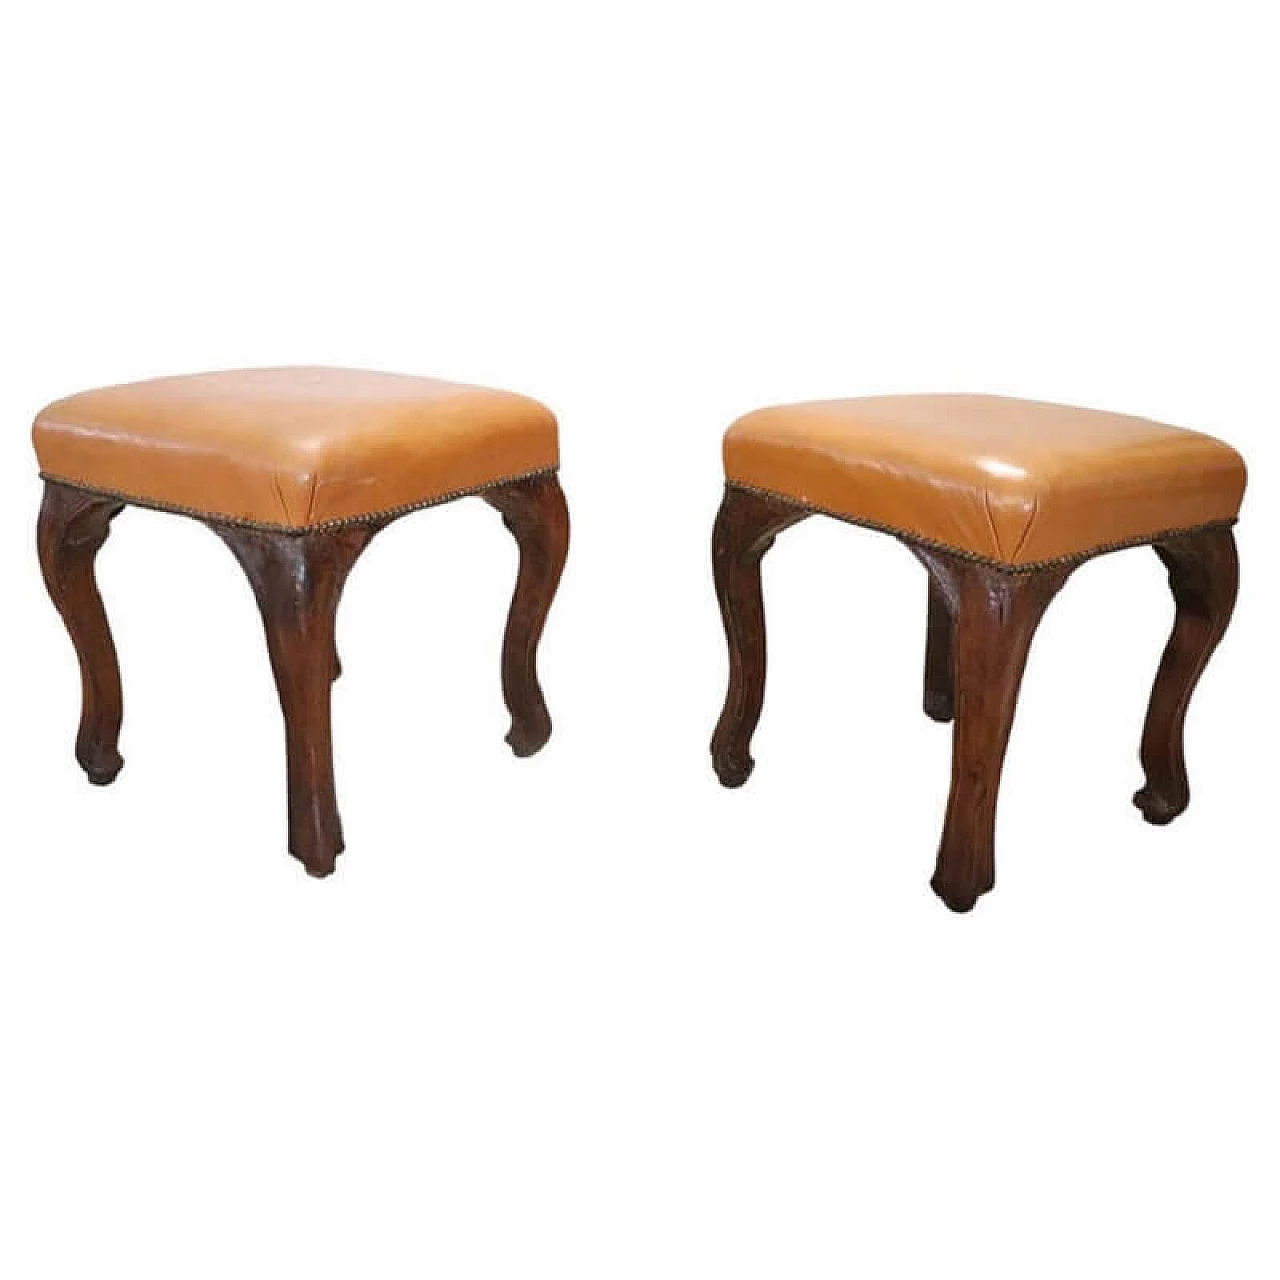 Pair of Louis XV stools in walnut and leather, 18th century 1